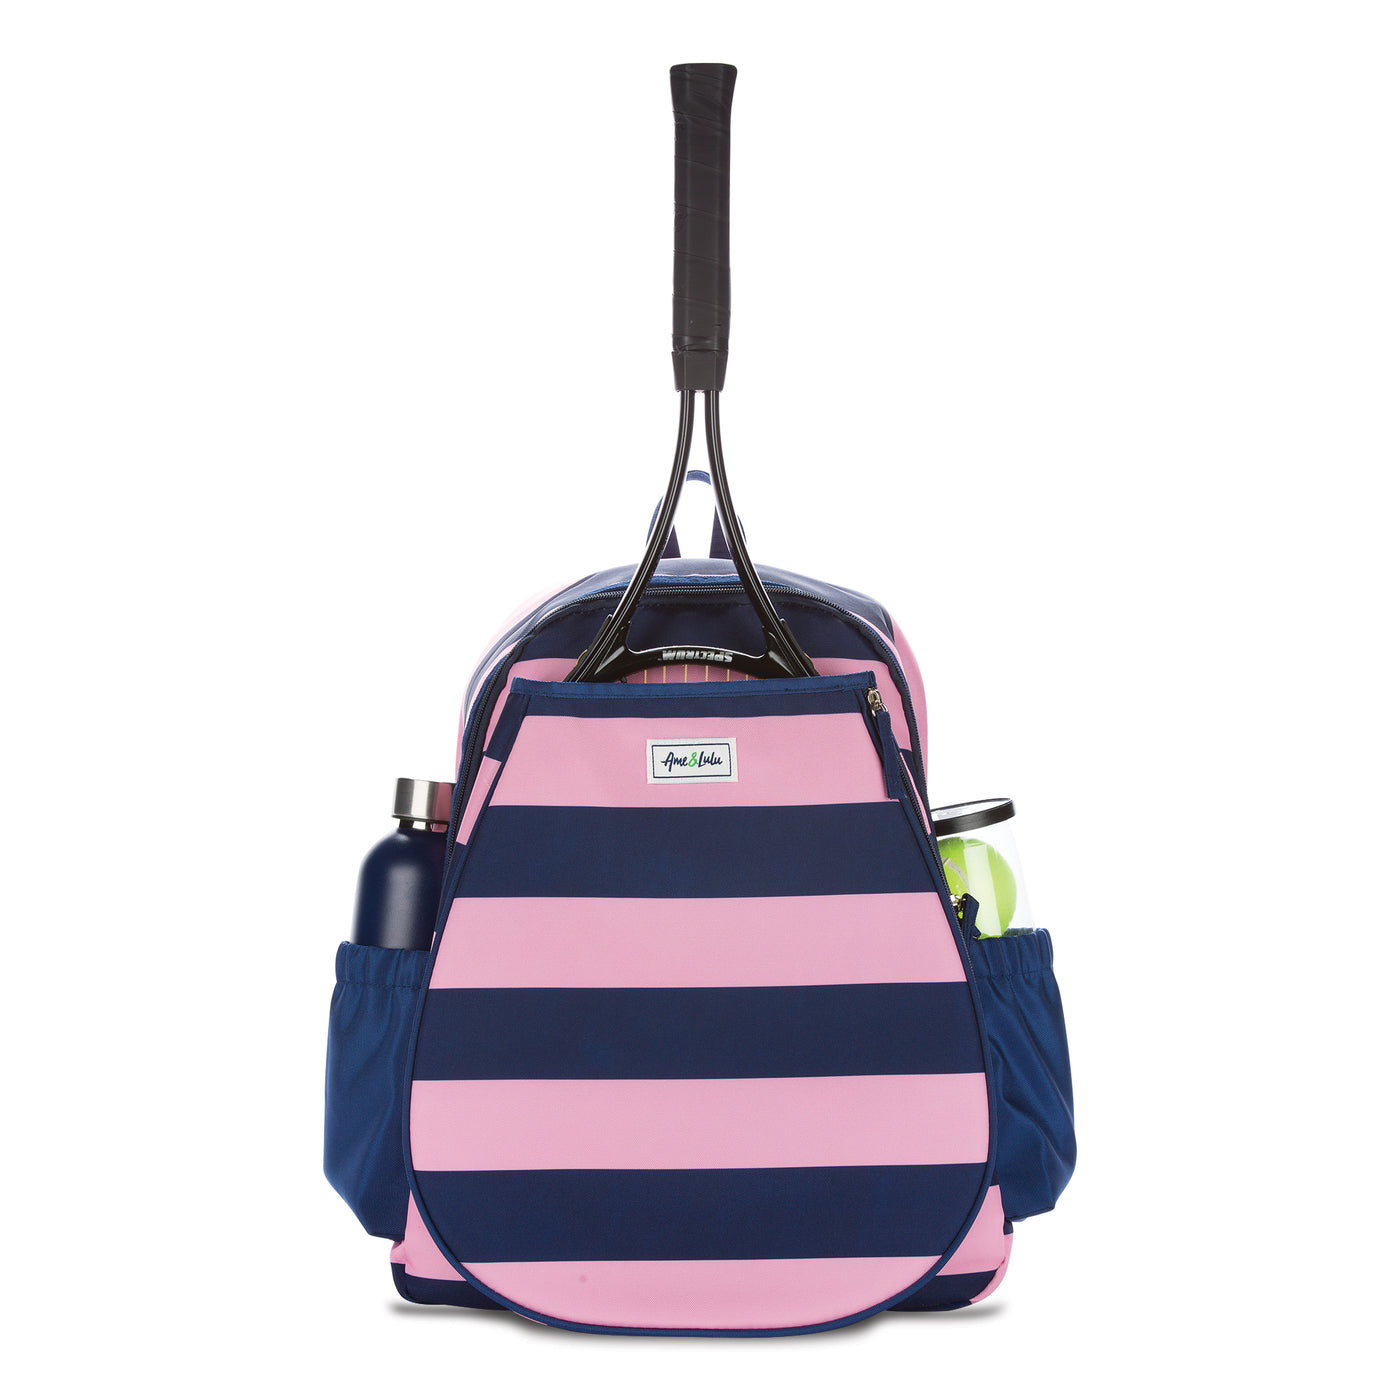 Front view of navy and pink striped tennis backpack. There is a tennis racquet in the front pocket and a water bottle and tennis balls in the side pockets.